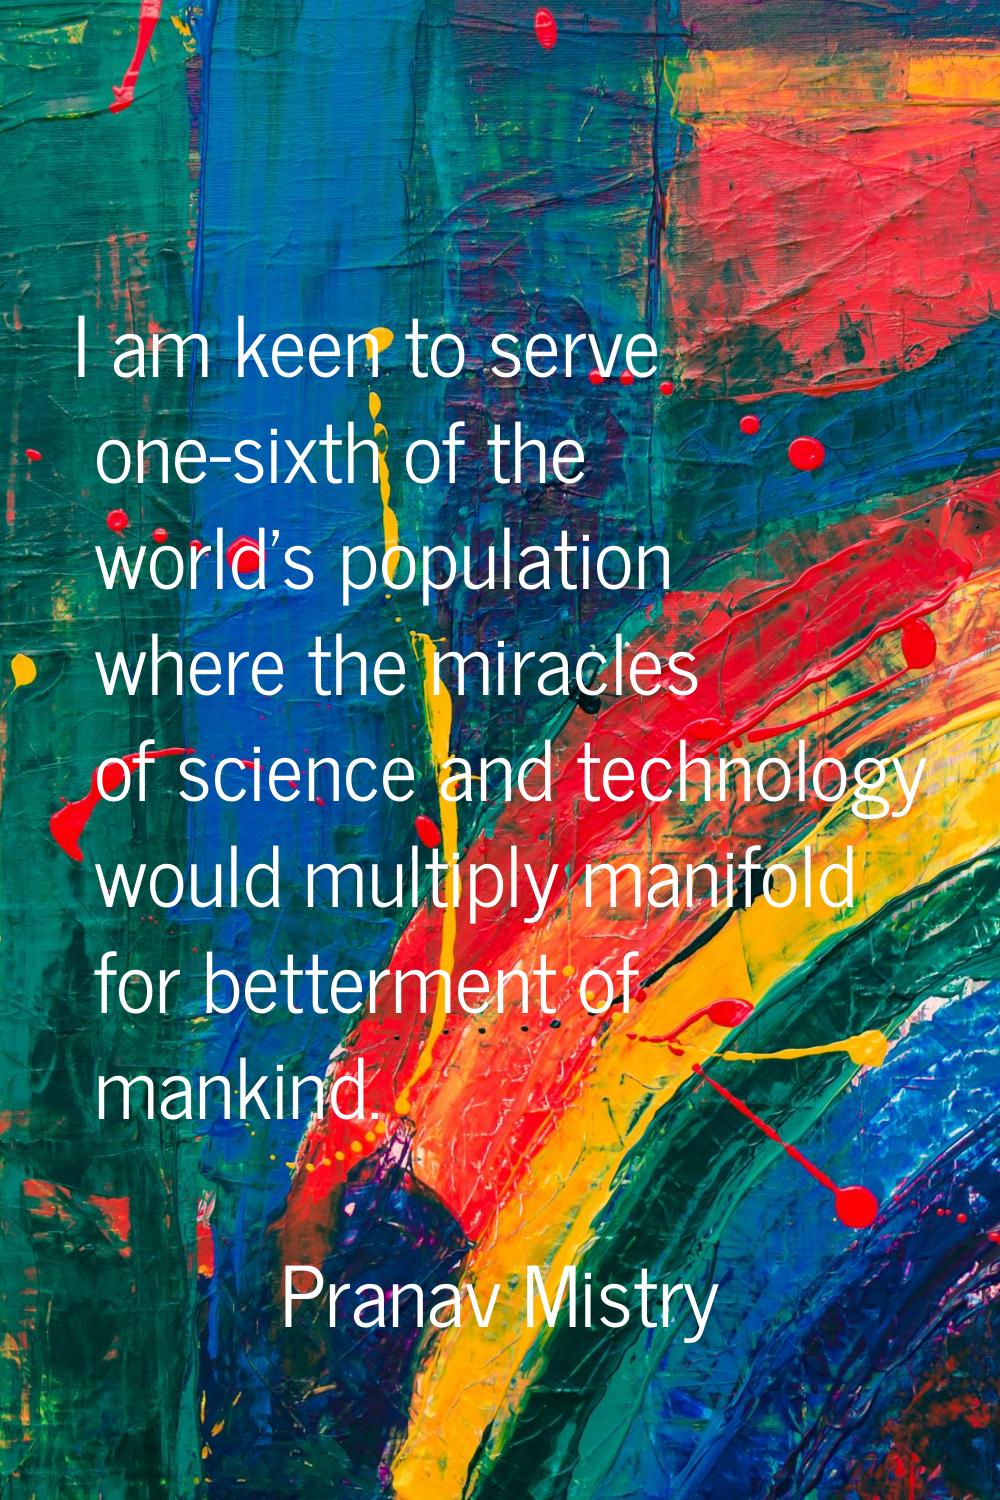 I am keen to serve one-sixth of the world's population where the miracles of science and technology